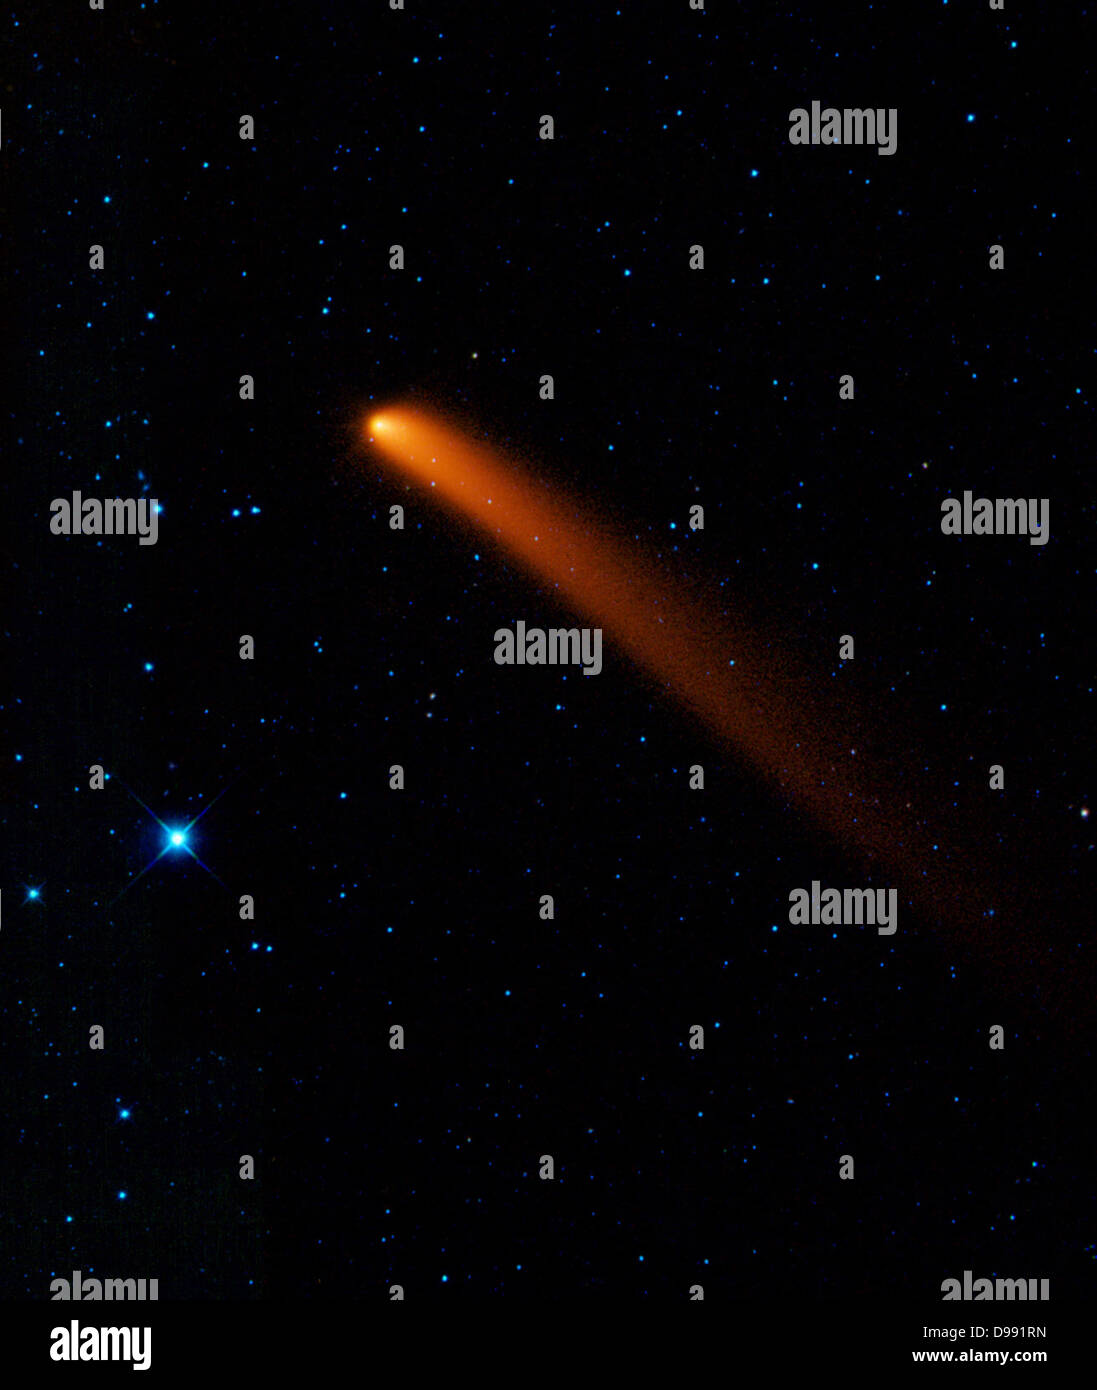 Infrared image of Comet Siding Spring (C/2007 Q3) discovered in 2007 by observers in Australia. Credit NASA. Science Astronomy Stock Photo